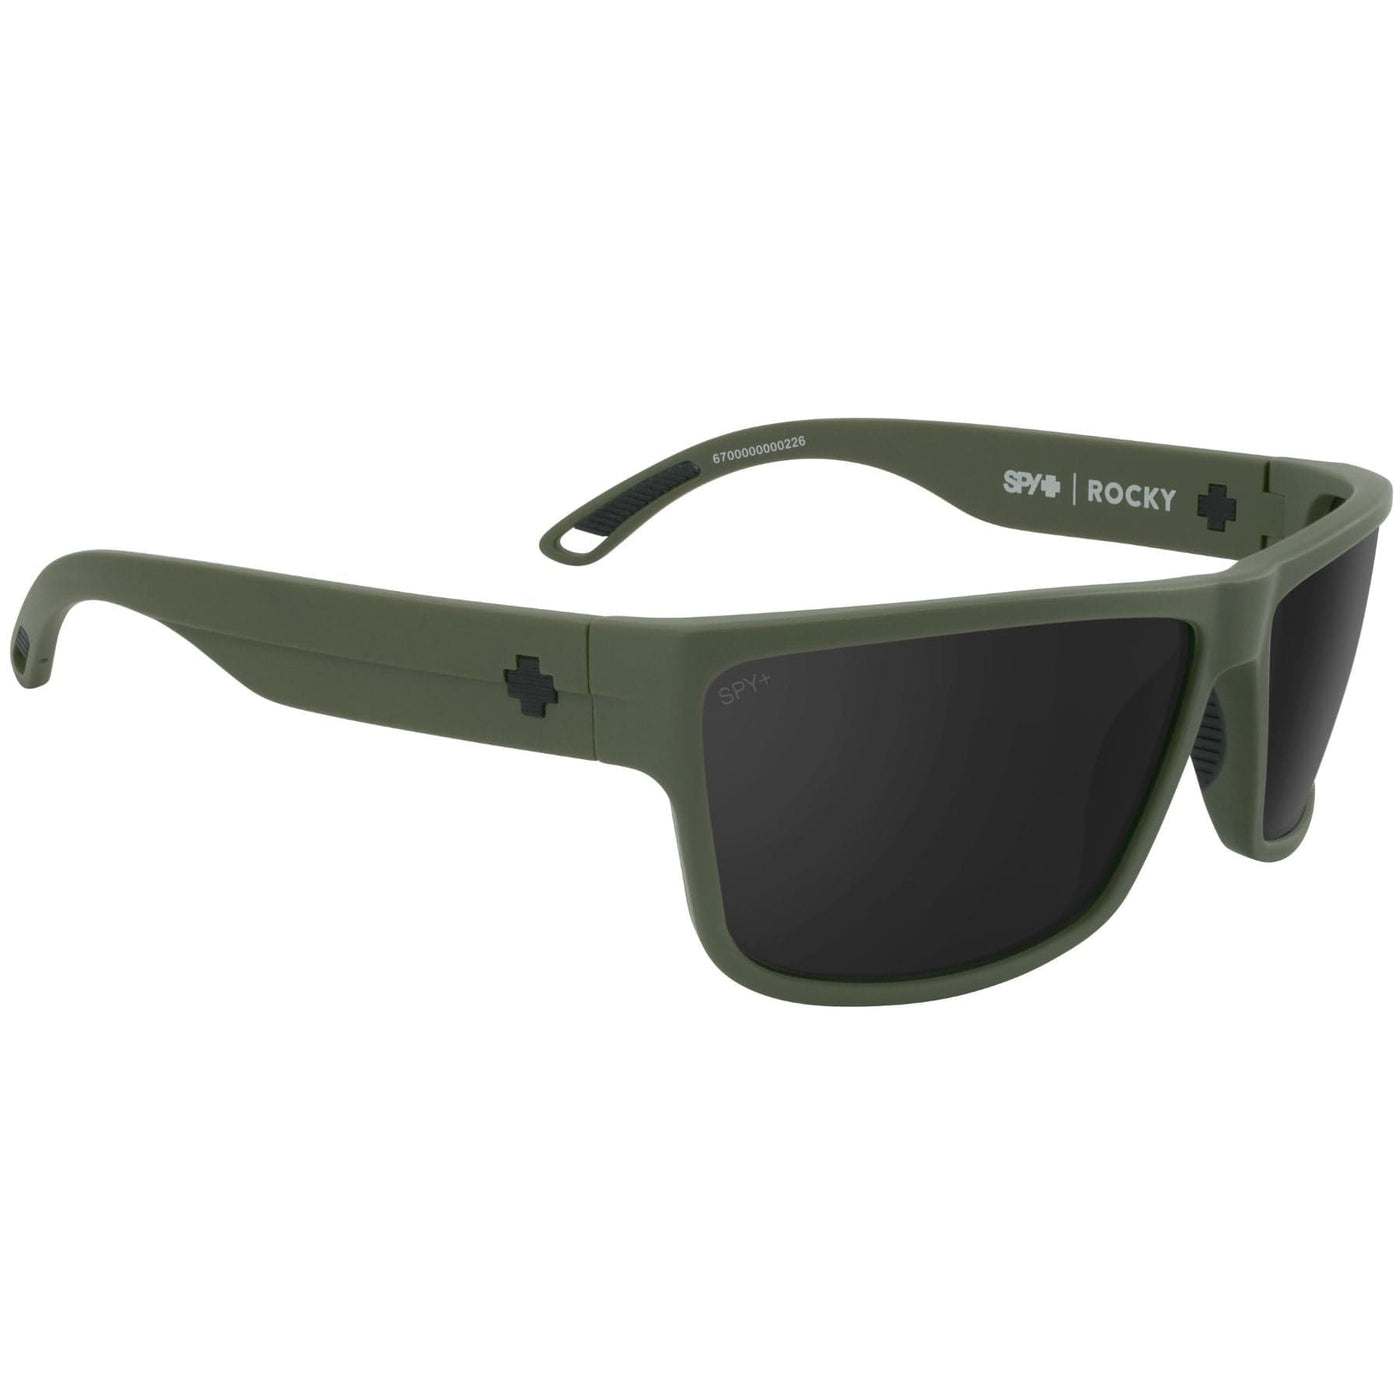 SPY ROCKY Sunglasses, Happy Lens - Army Green 8Lines Shop - Fast Shipping